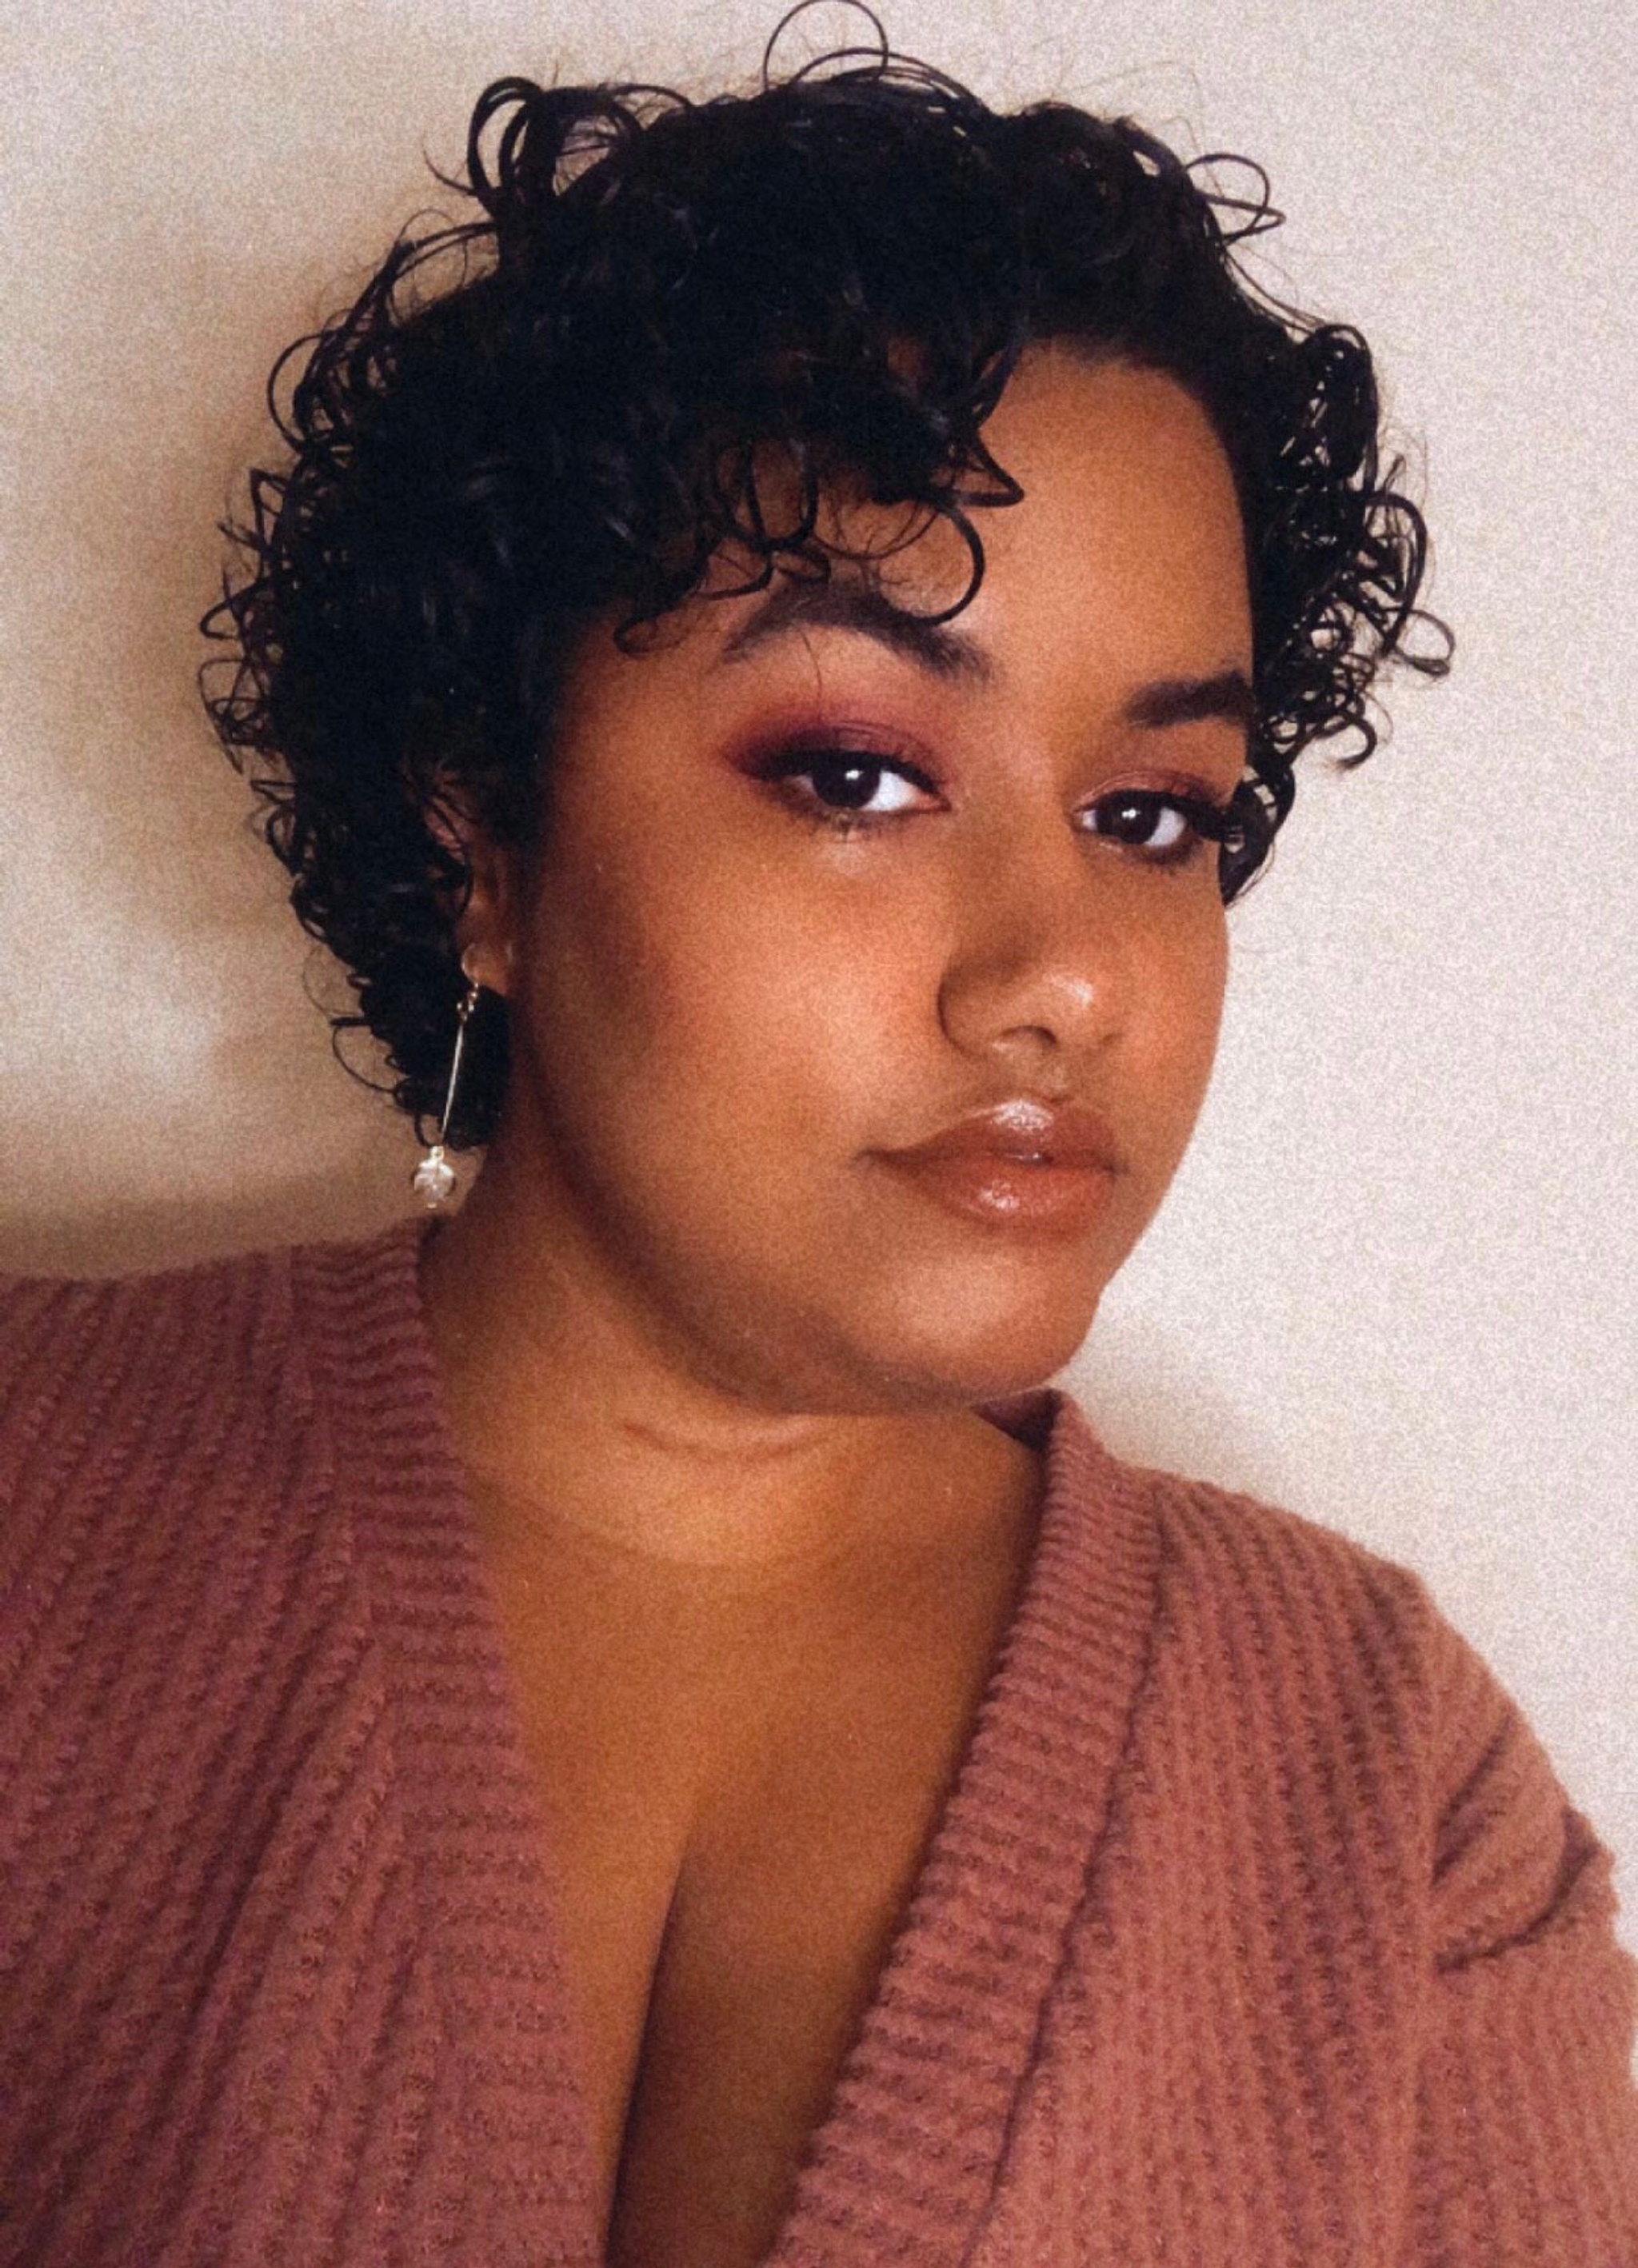 A portrait of singer Genesis Adelia Codallo, a Dominican person who has short curly hair that falls in rings over her forehead and wears a light pink sweater.